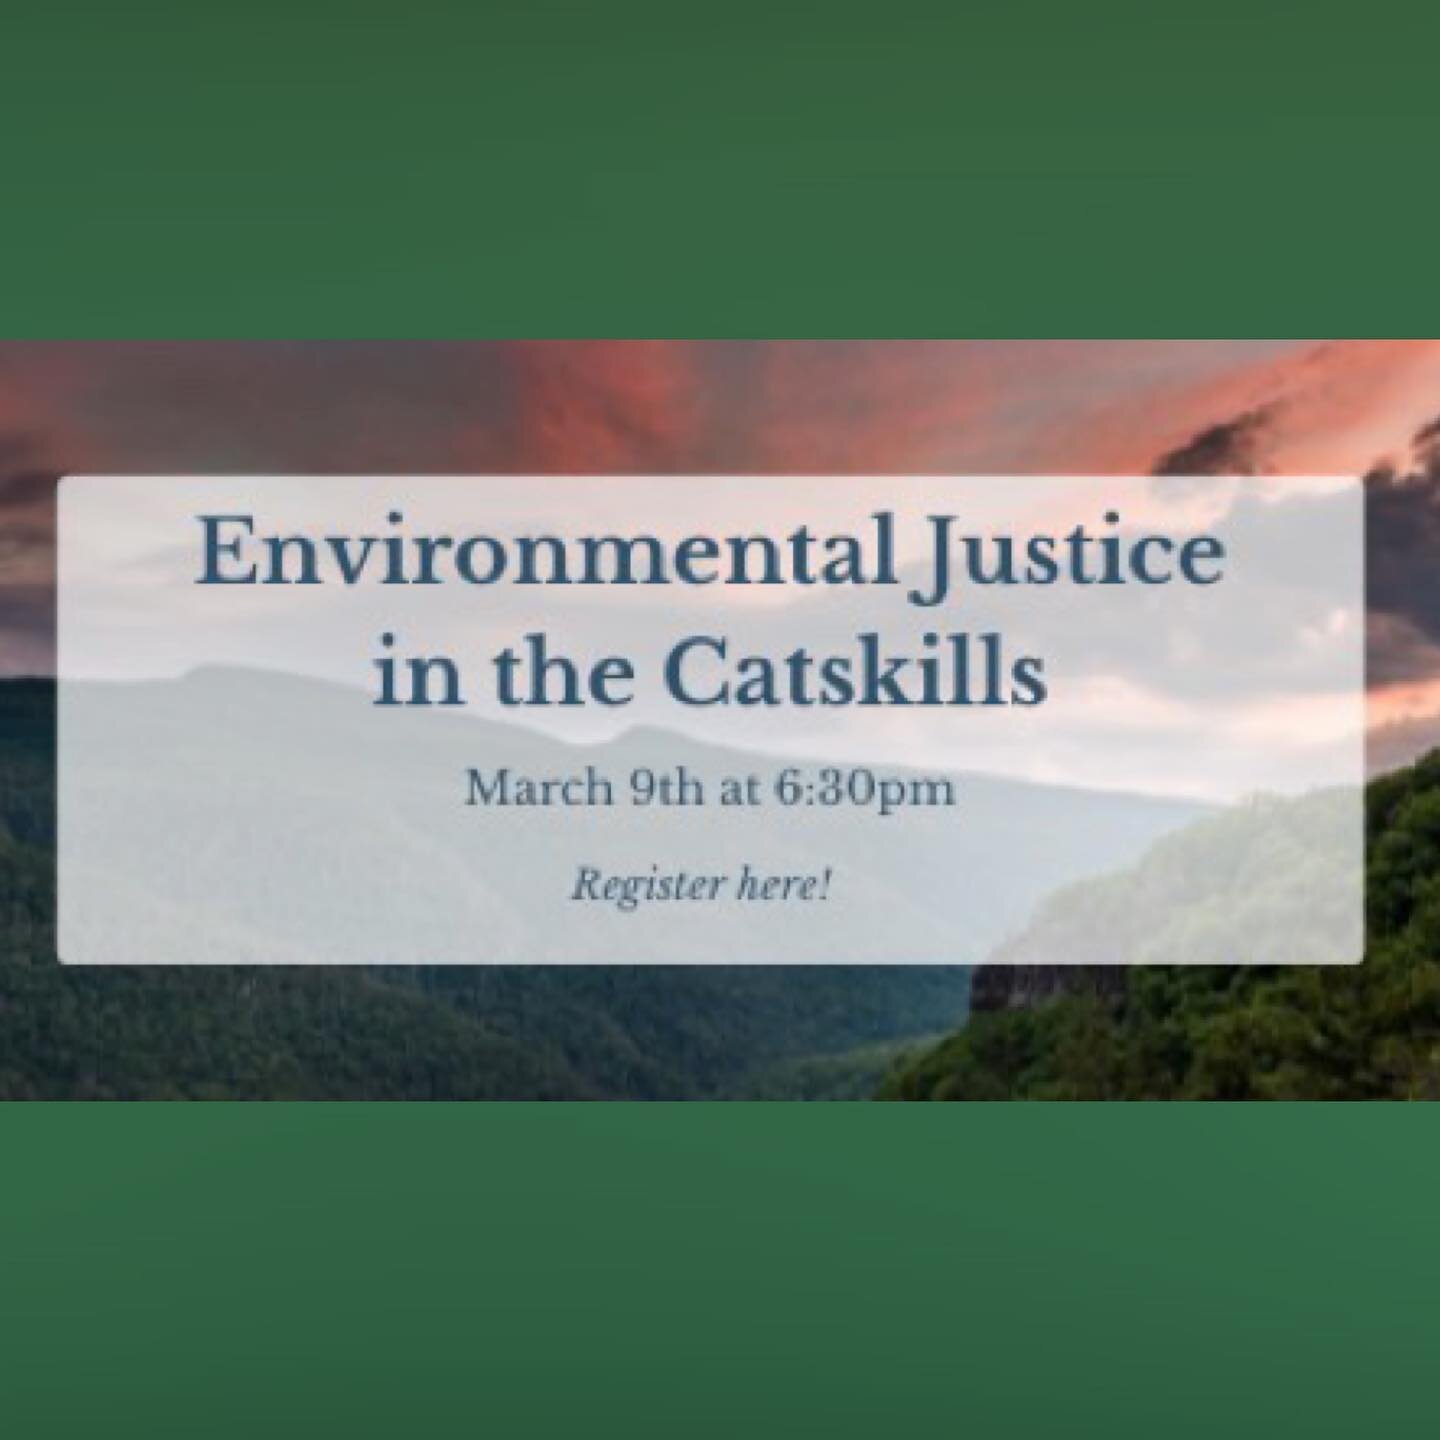 Join our friends @mountainkeeper next Wed (3/9) - 6:30pm EST for an informative look at #environmentaljustice and the issues facing our Catskill communities (registration link in bio).
&mdash;
What does environmental justice mean? Who does it affect?